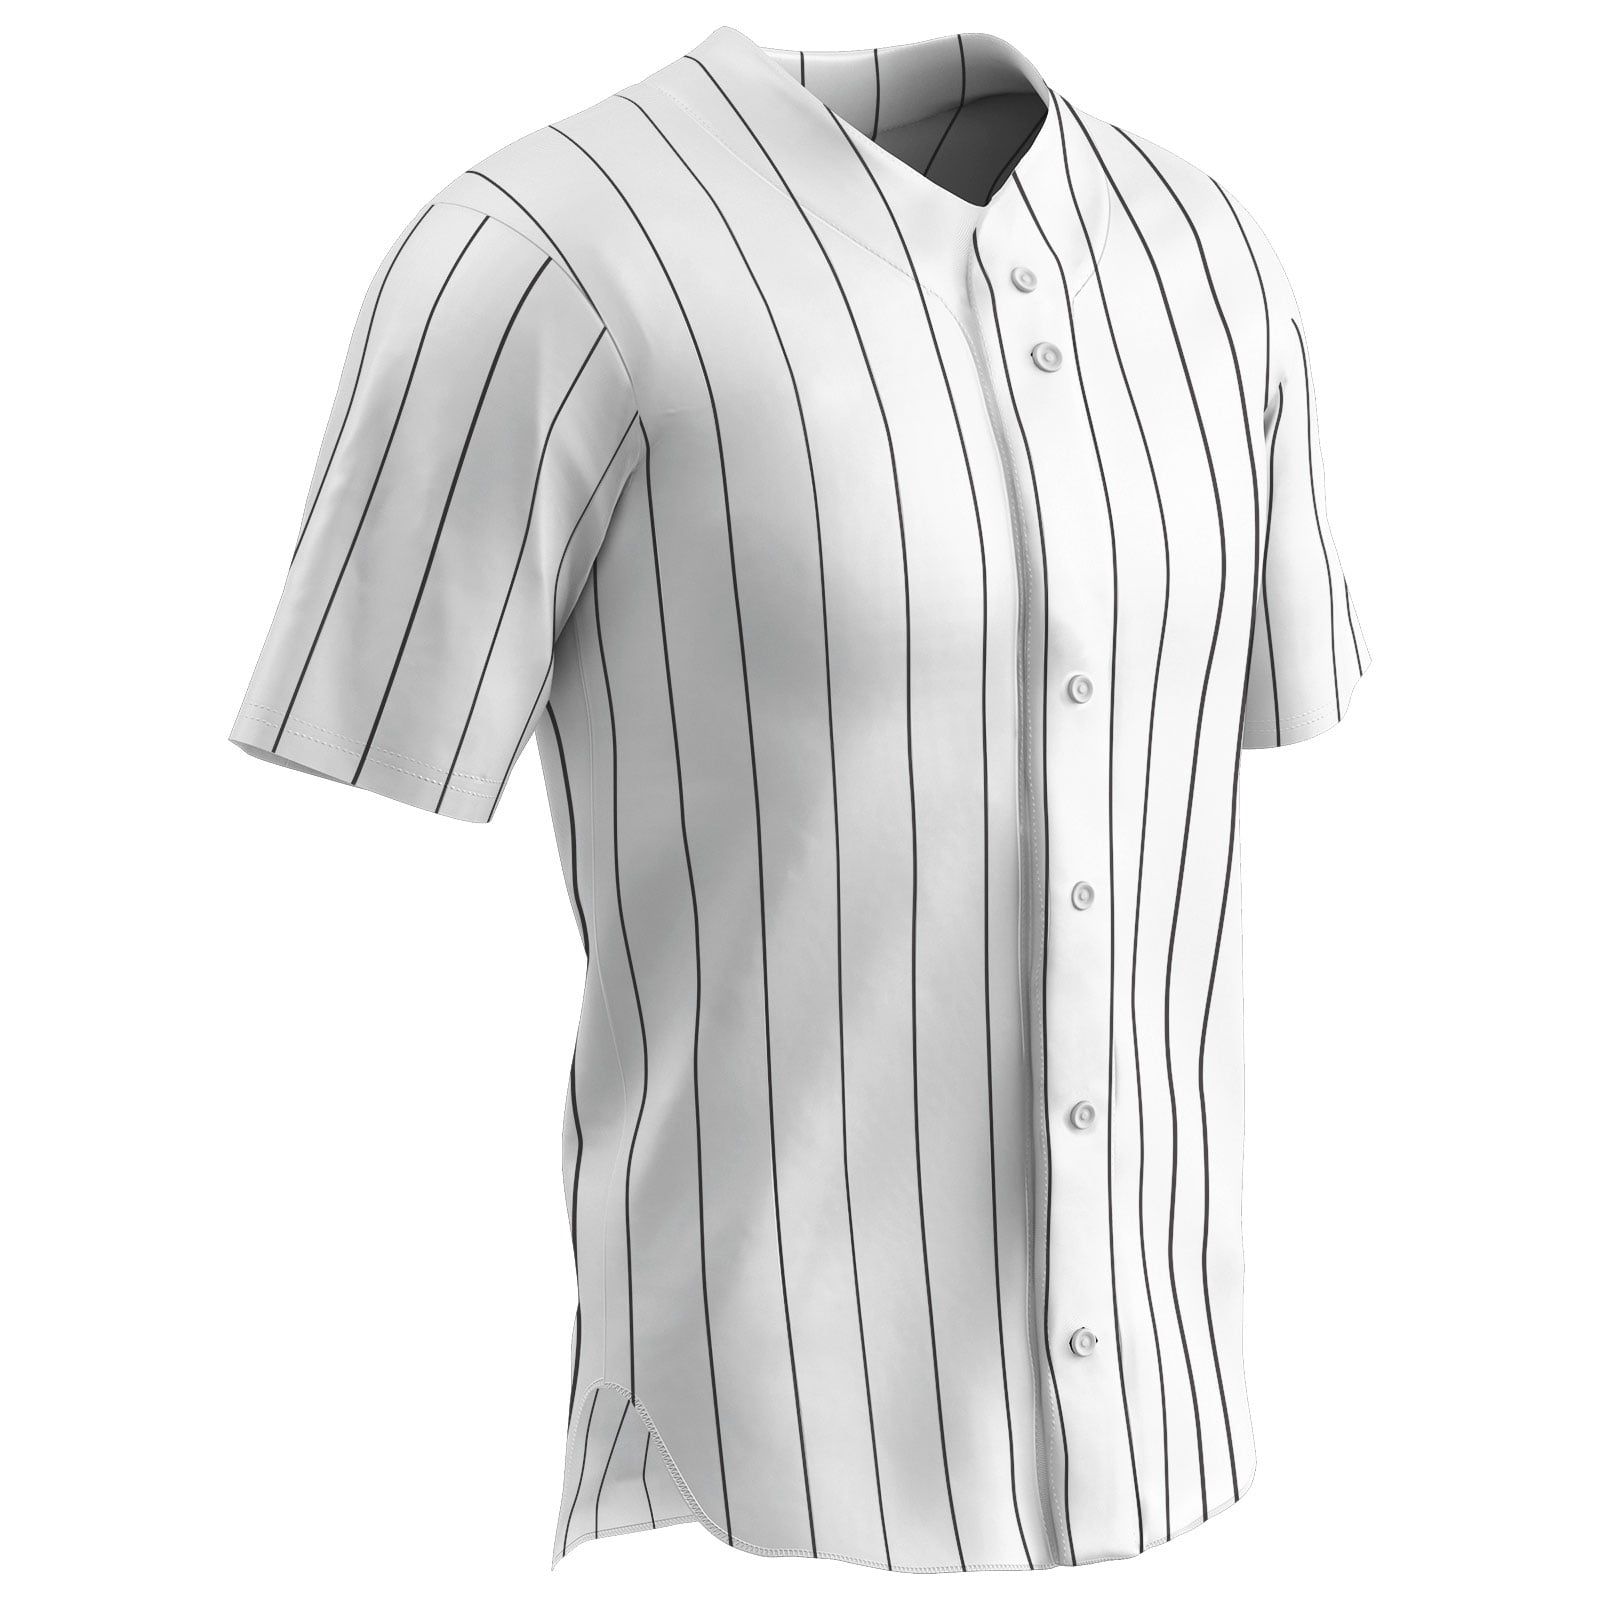 Ace Polyester Button-Front Baseball Jersey, Adult 2X-Large, White with Black  Pinstripes 